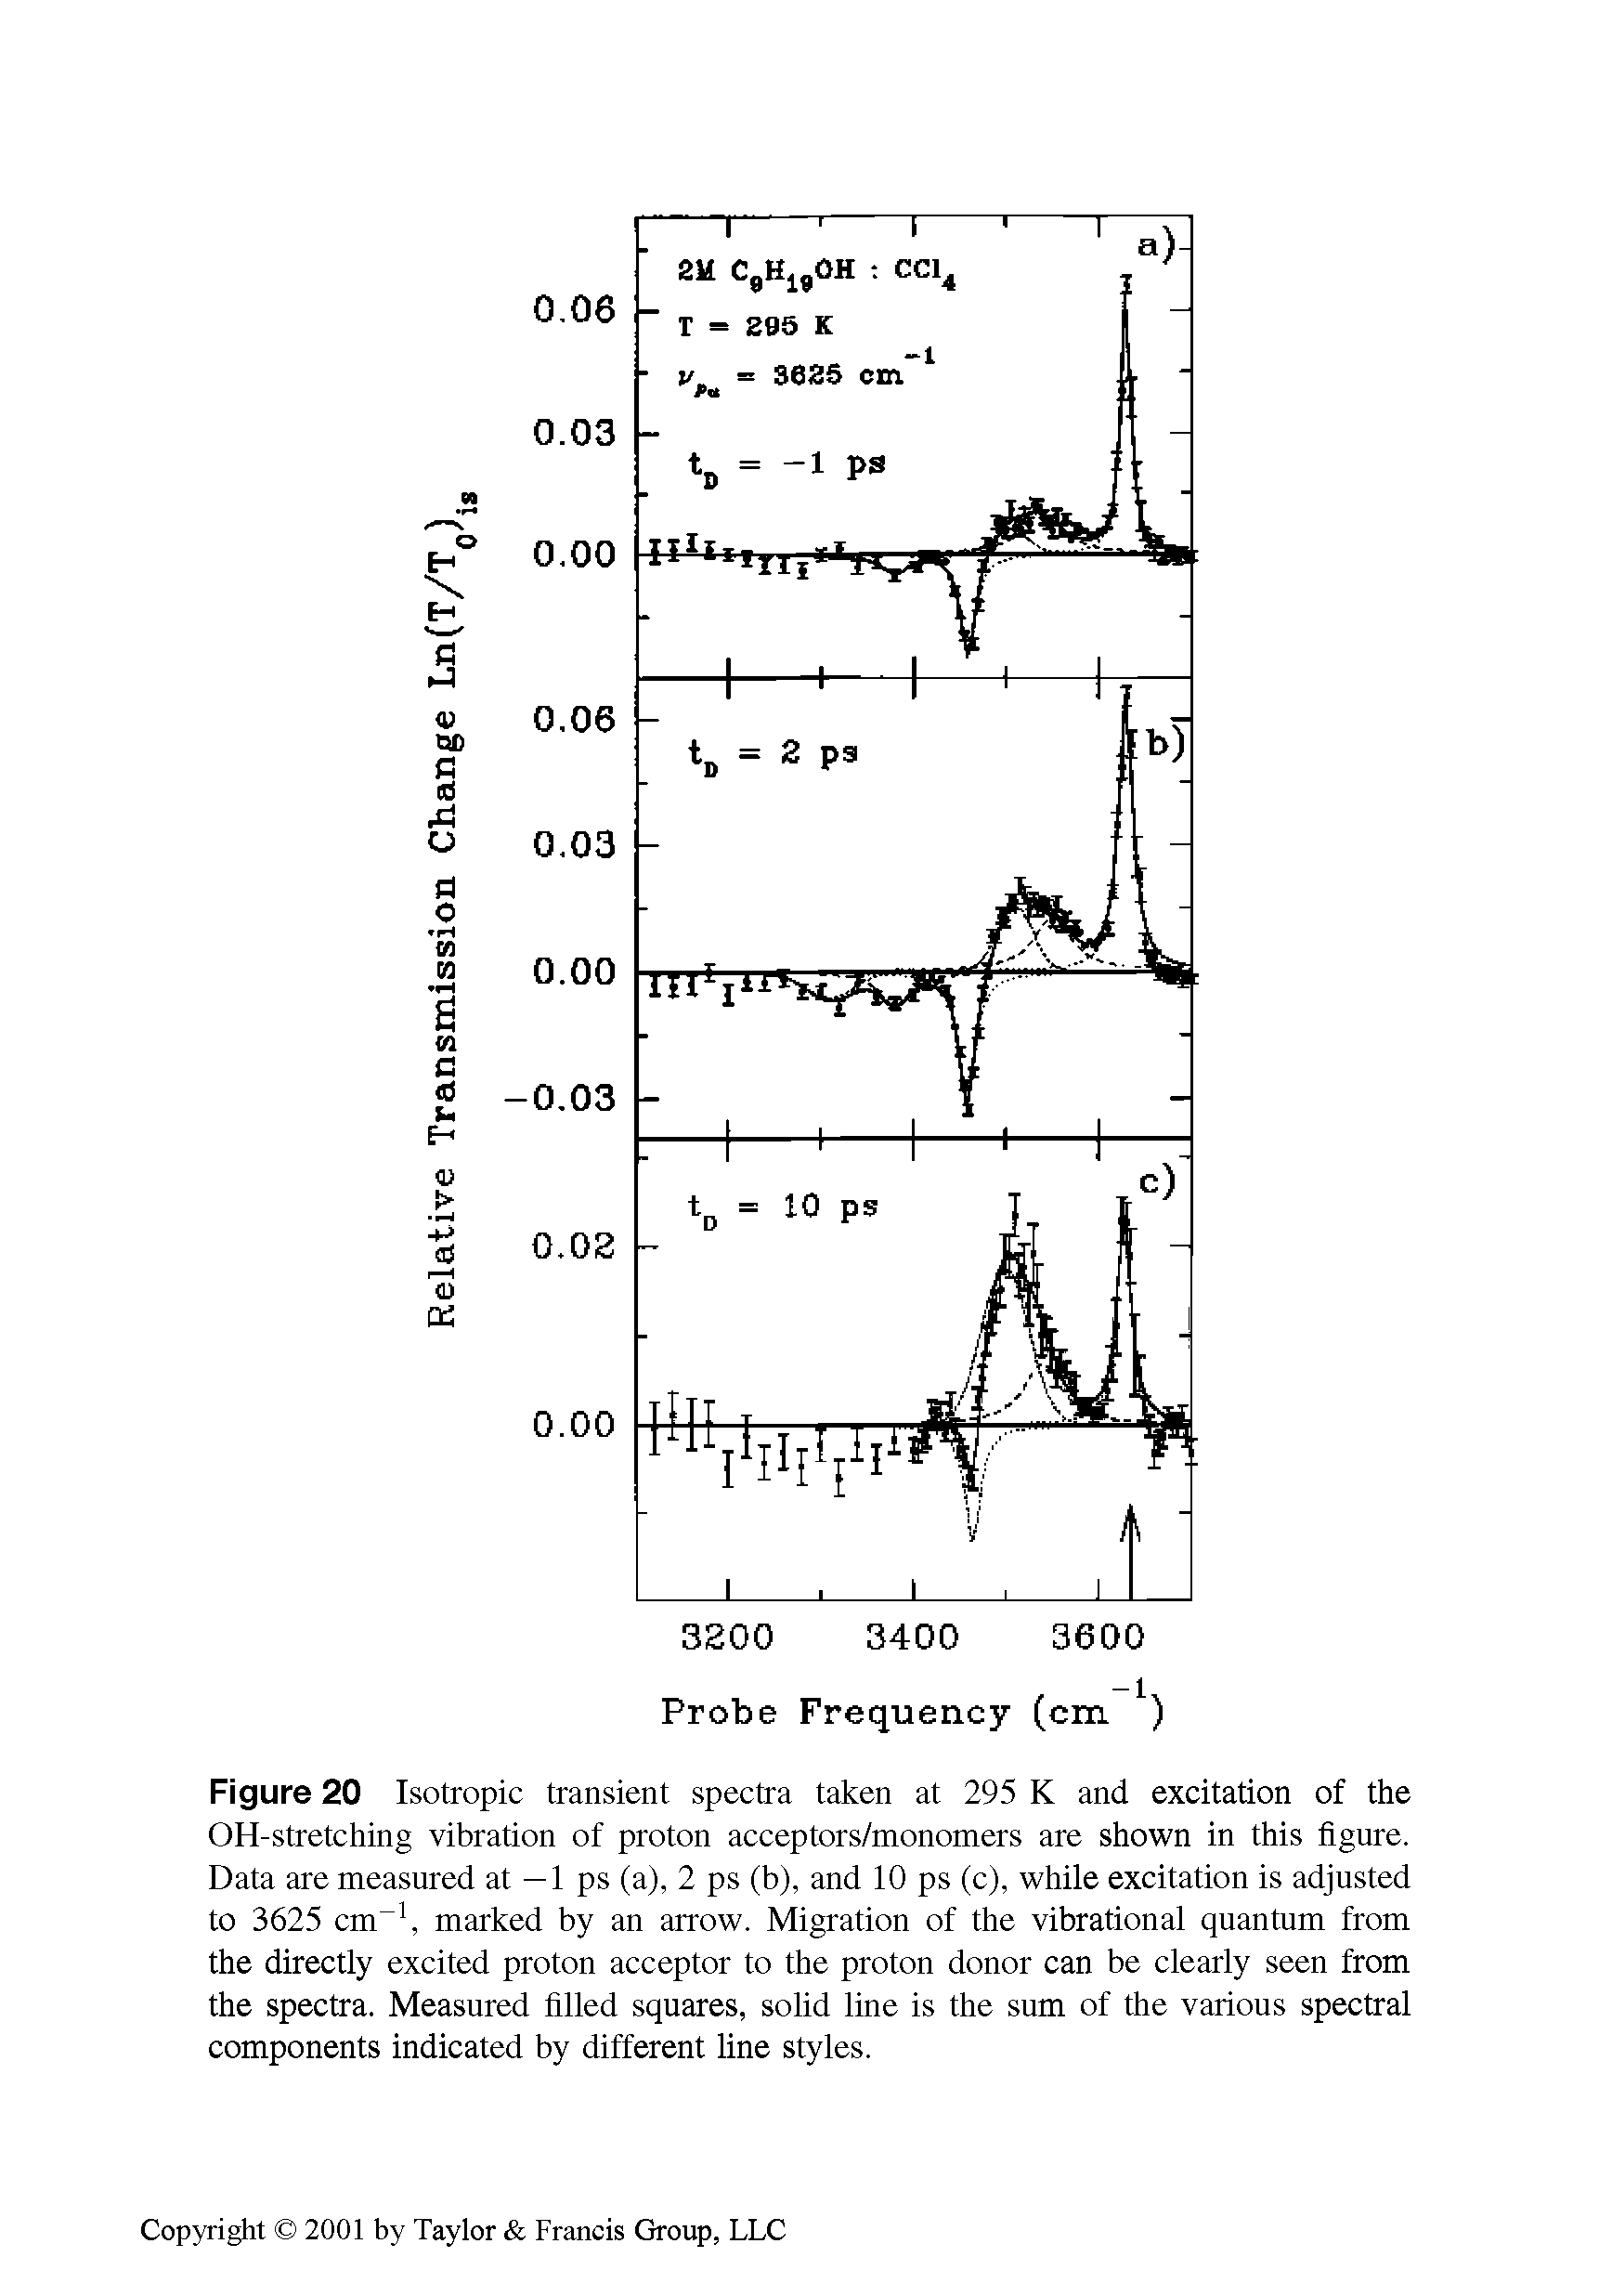 Figure 20 Isotropic transient spectra taken at 295 K and excitation of the OH-stretching vibration of proton acceptors/monomers are shown in this figure. Data are measured at —1 ps (a), 2 ps (b), and 10 ps (c), while excitation is adjusted to 3625 cm-1, marked by an arrow. Migration of the vibrational quantum from the directly excited proton acceptor to the proton donor can be clearly seen from the spectra. Measured filled squares, solid line is the sum of the various spectral components indicated by different line styles.